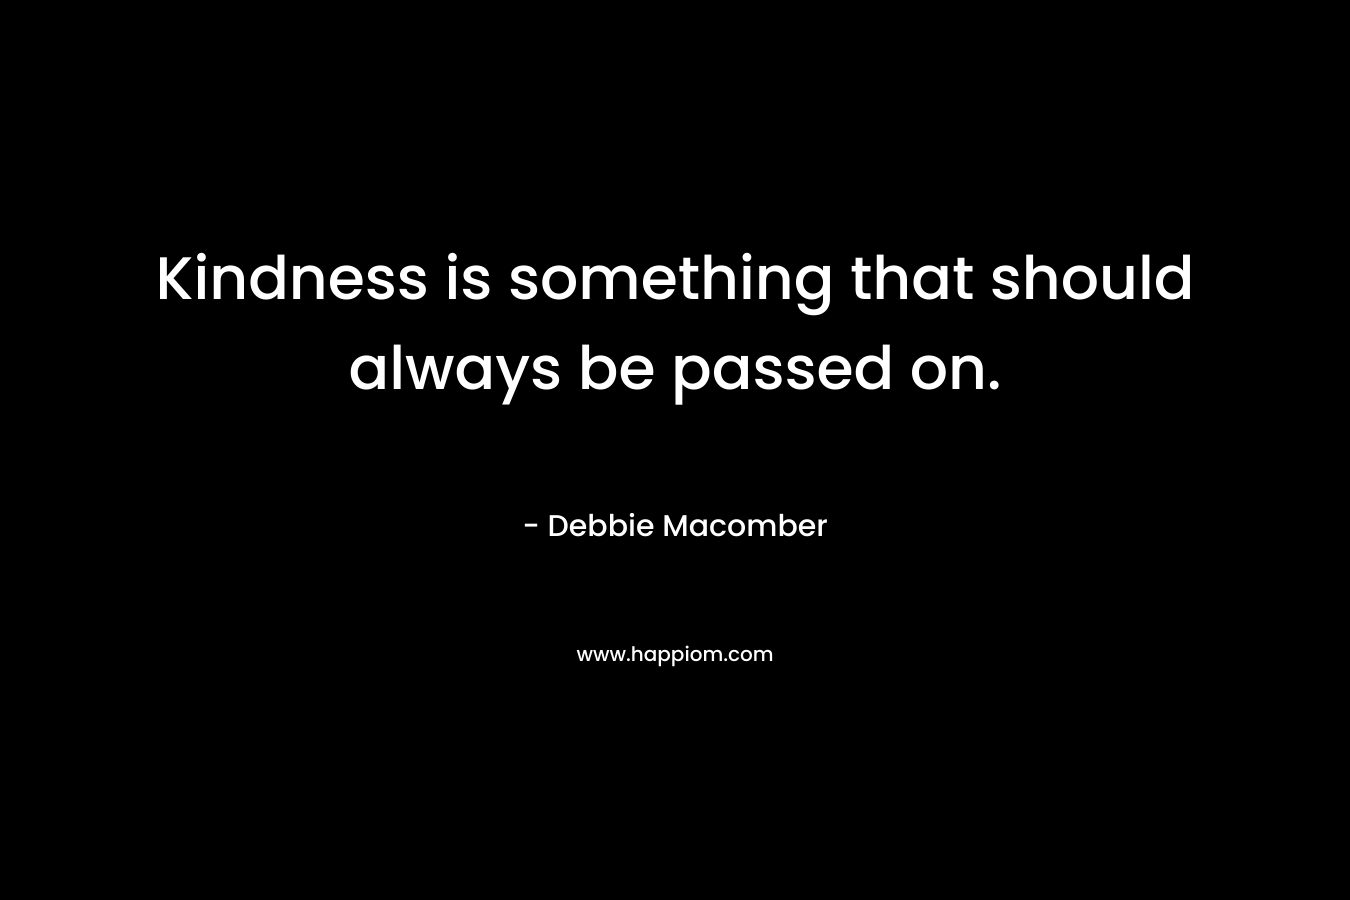 Kindness is something that should always be passed on.